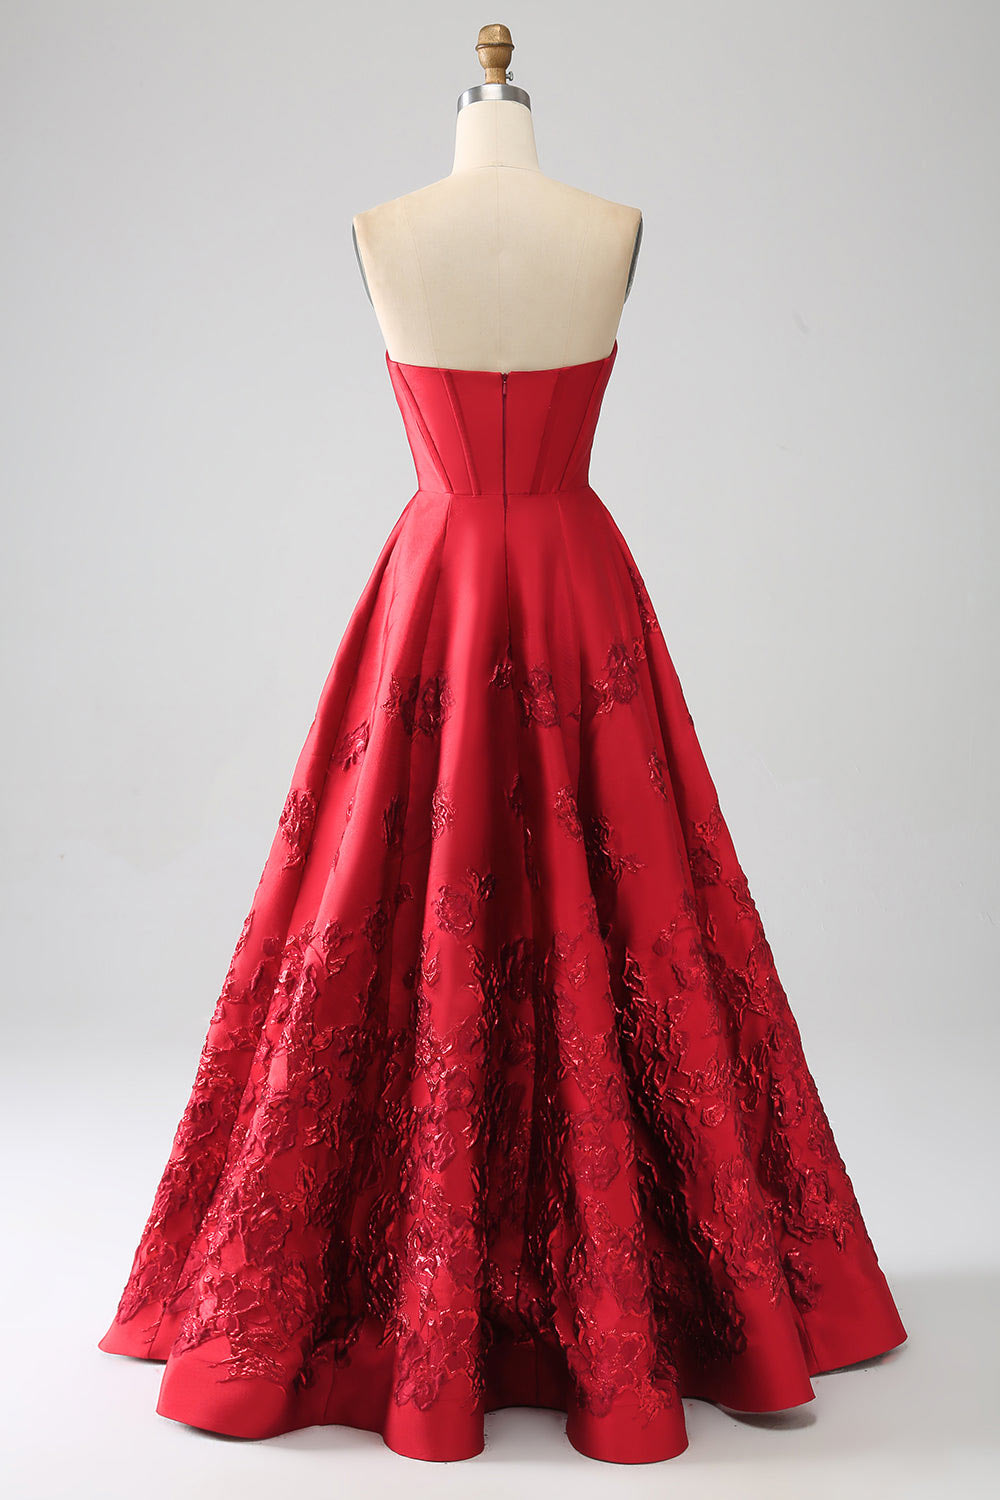 Strapless floral embroidery prom dress, dark red evening gown, custom party dress